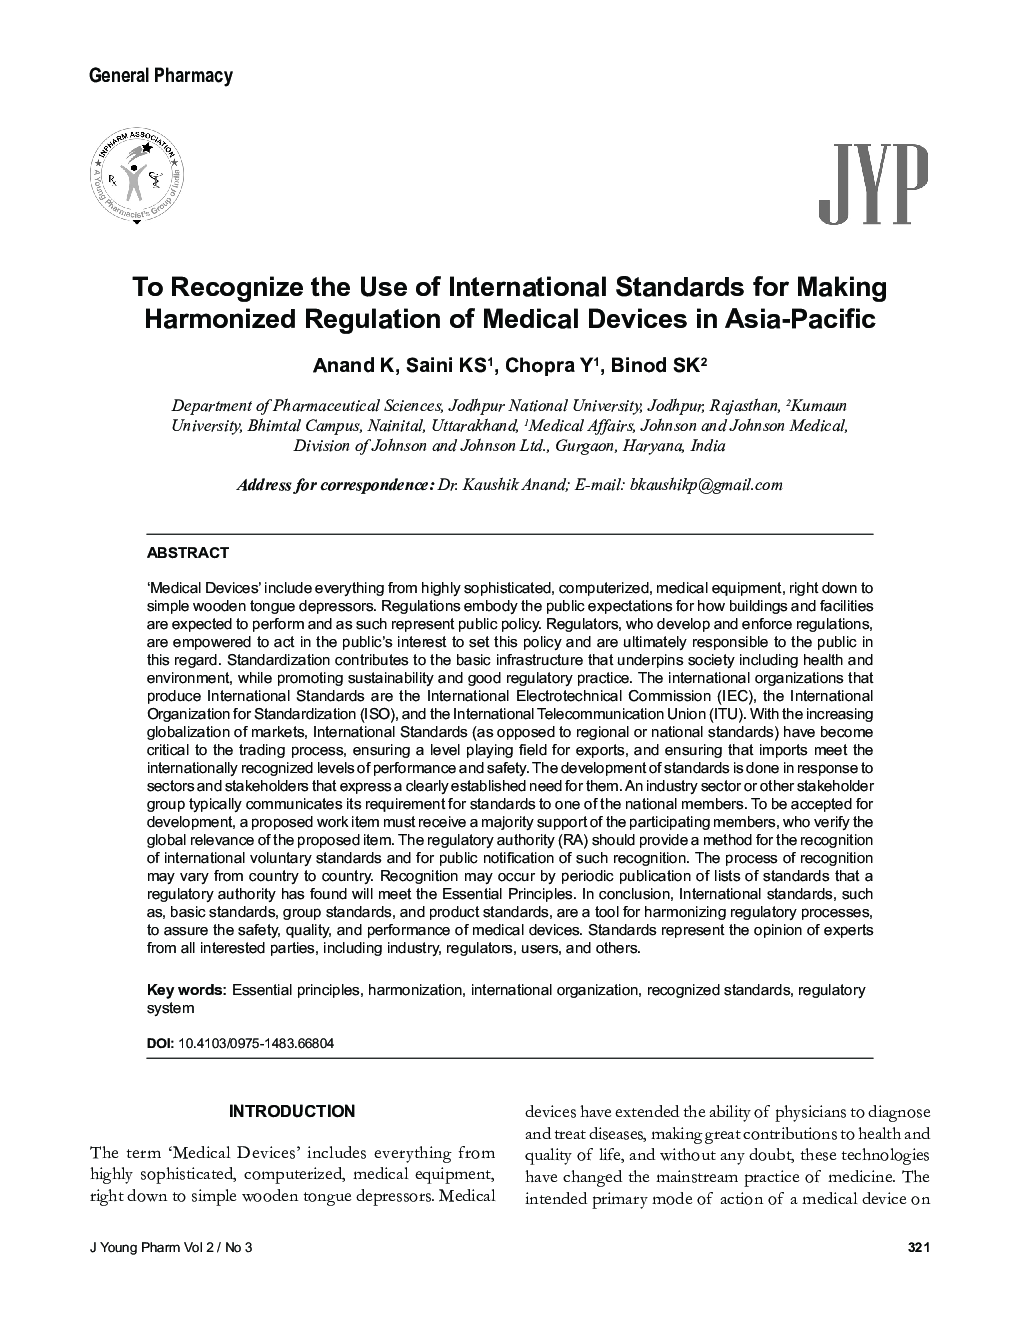 To Recognize the Use of International Standards for Making Harmonized Regulation of Medical Devices in Asia-Pacific